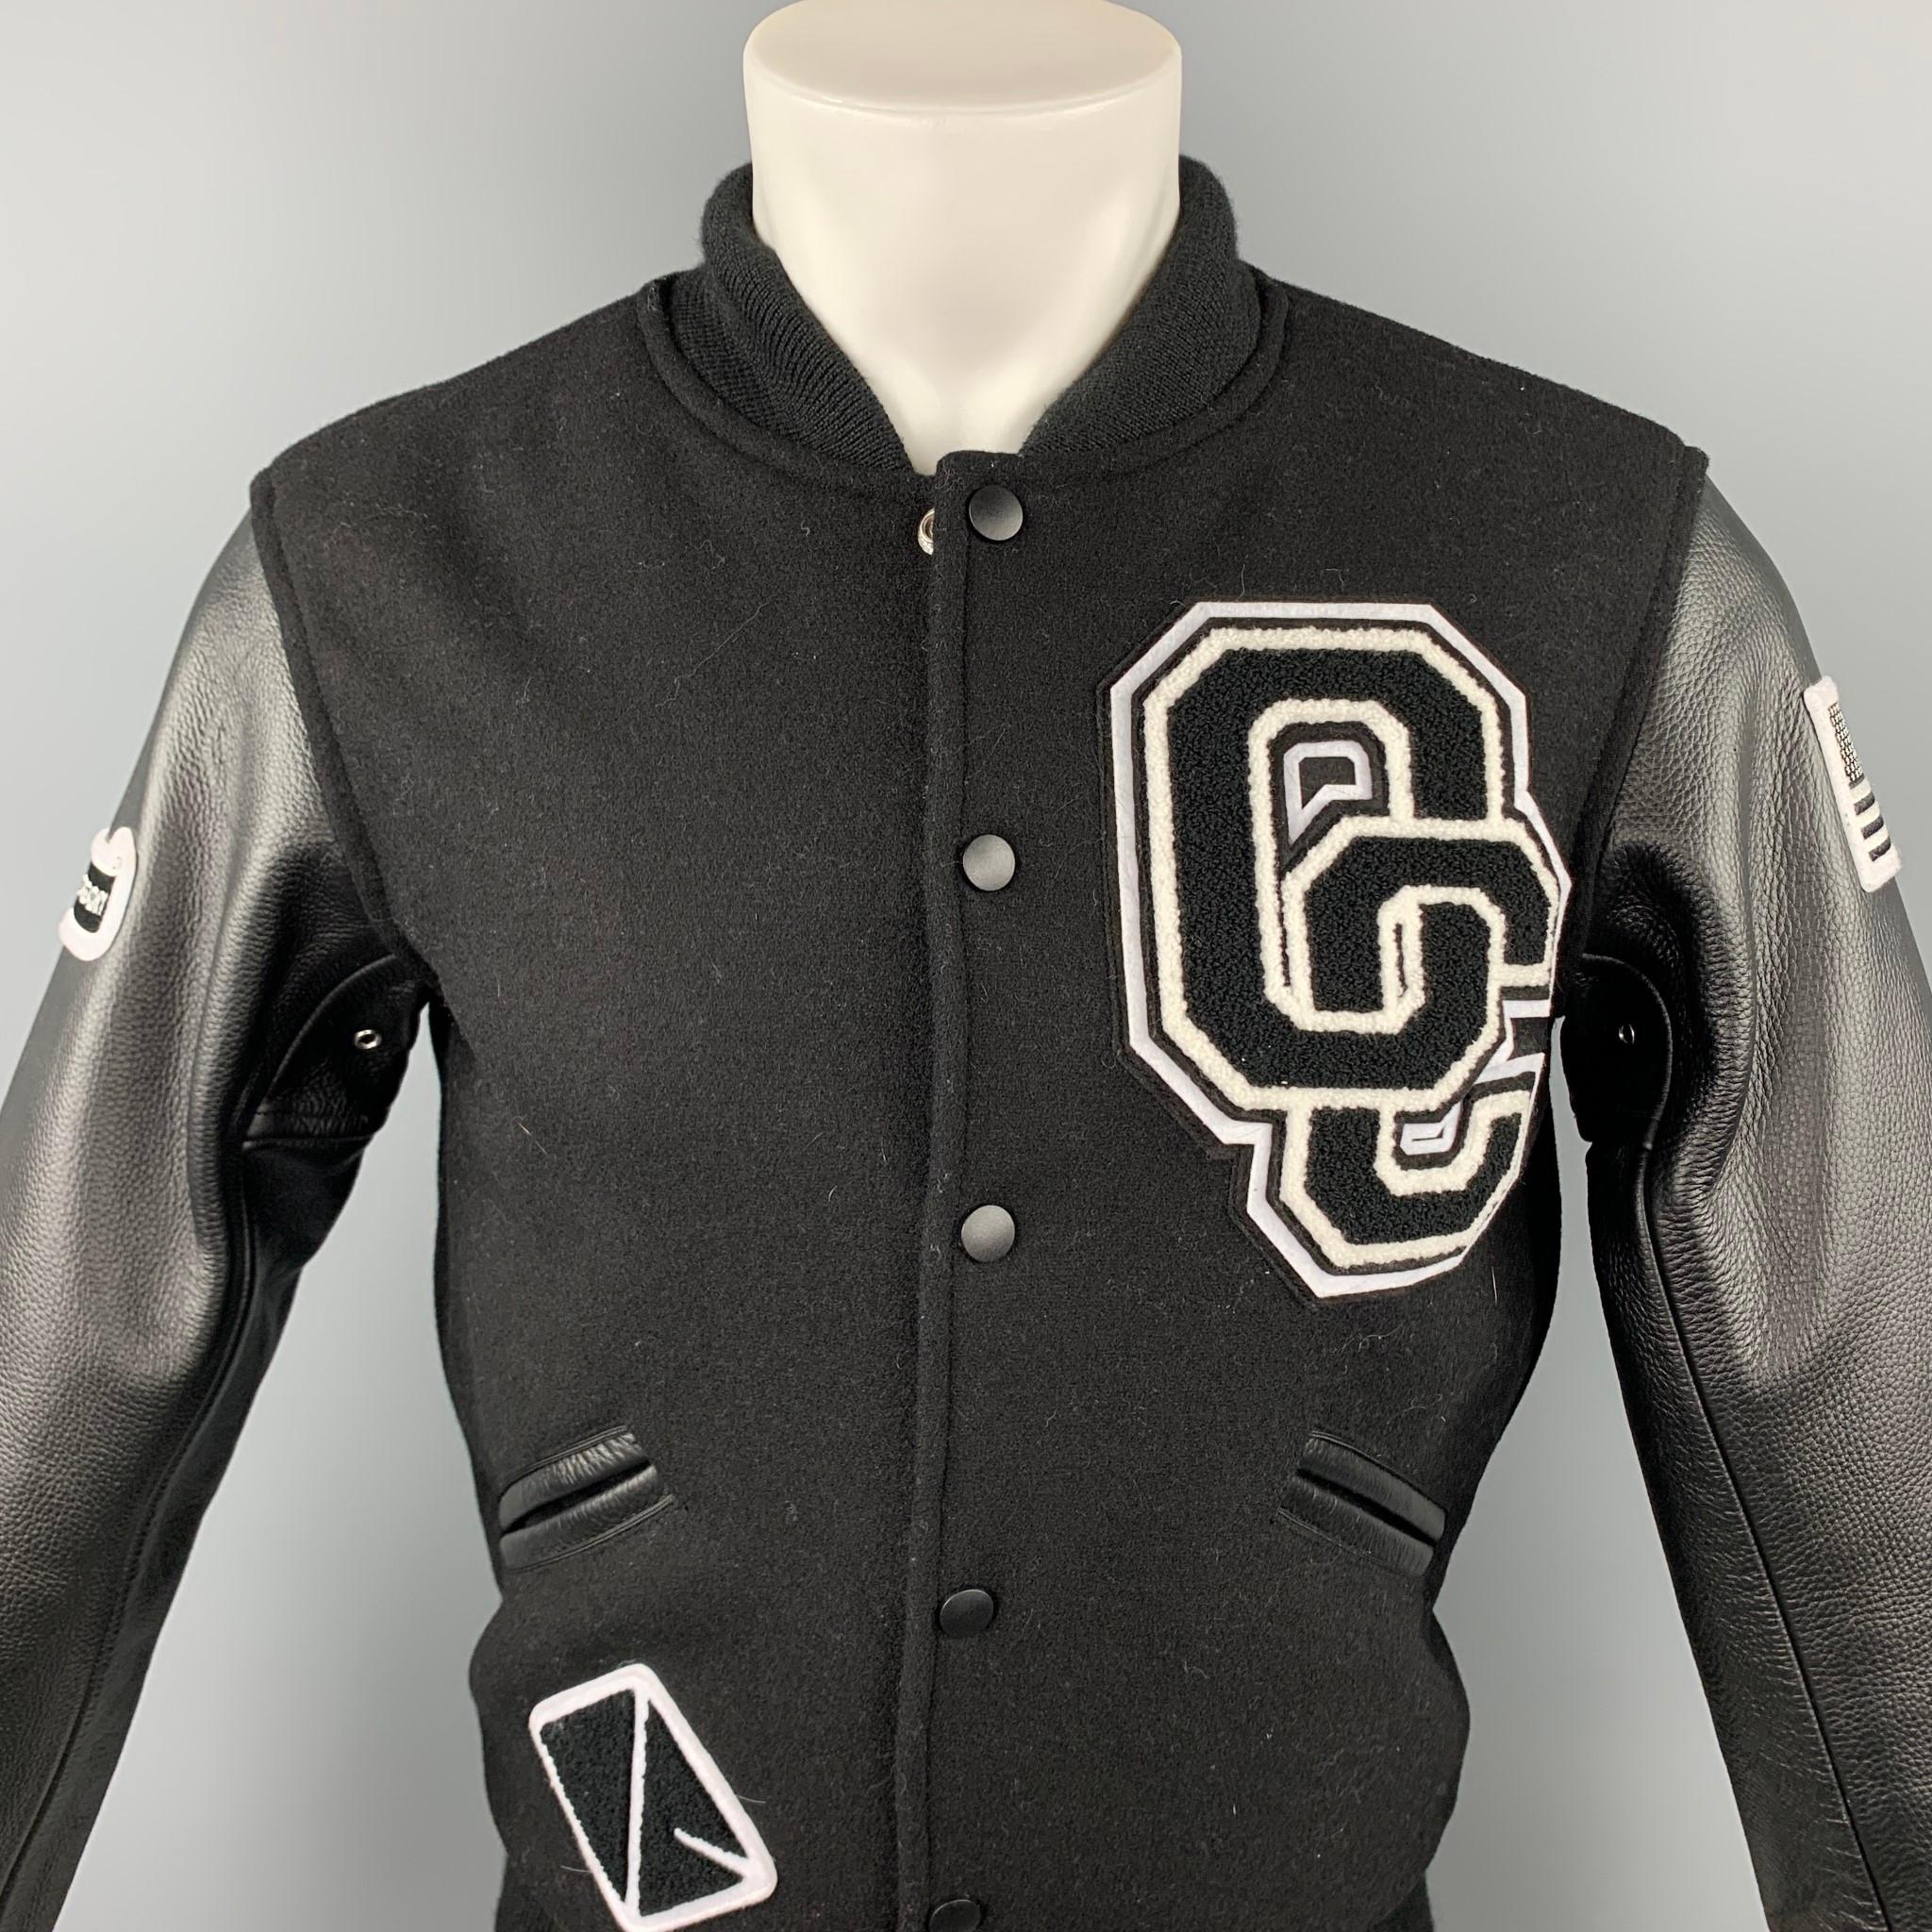 OPENING CEREMONY jacket comes in a black & white wool with leather sleeves featuring a varsity style, patch details, full liner, slit pockets, and a snap button closure.

Very Good Pre-Owned Condition.
Marked: XS

Measurements:

Shoulder: 18